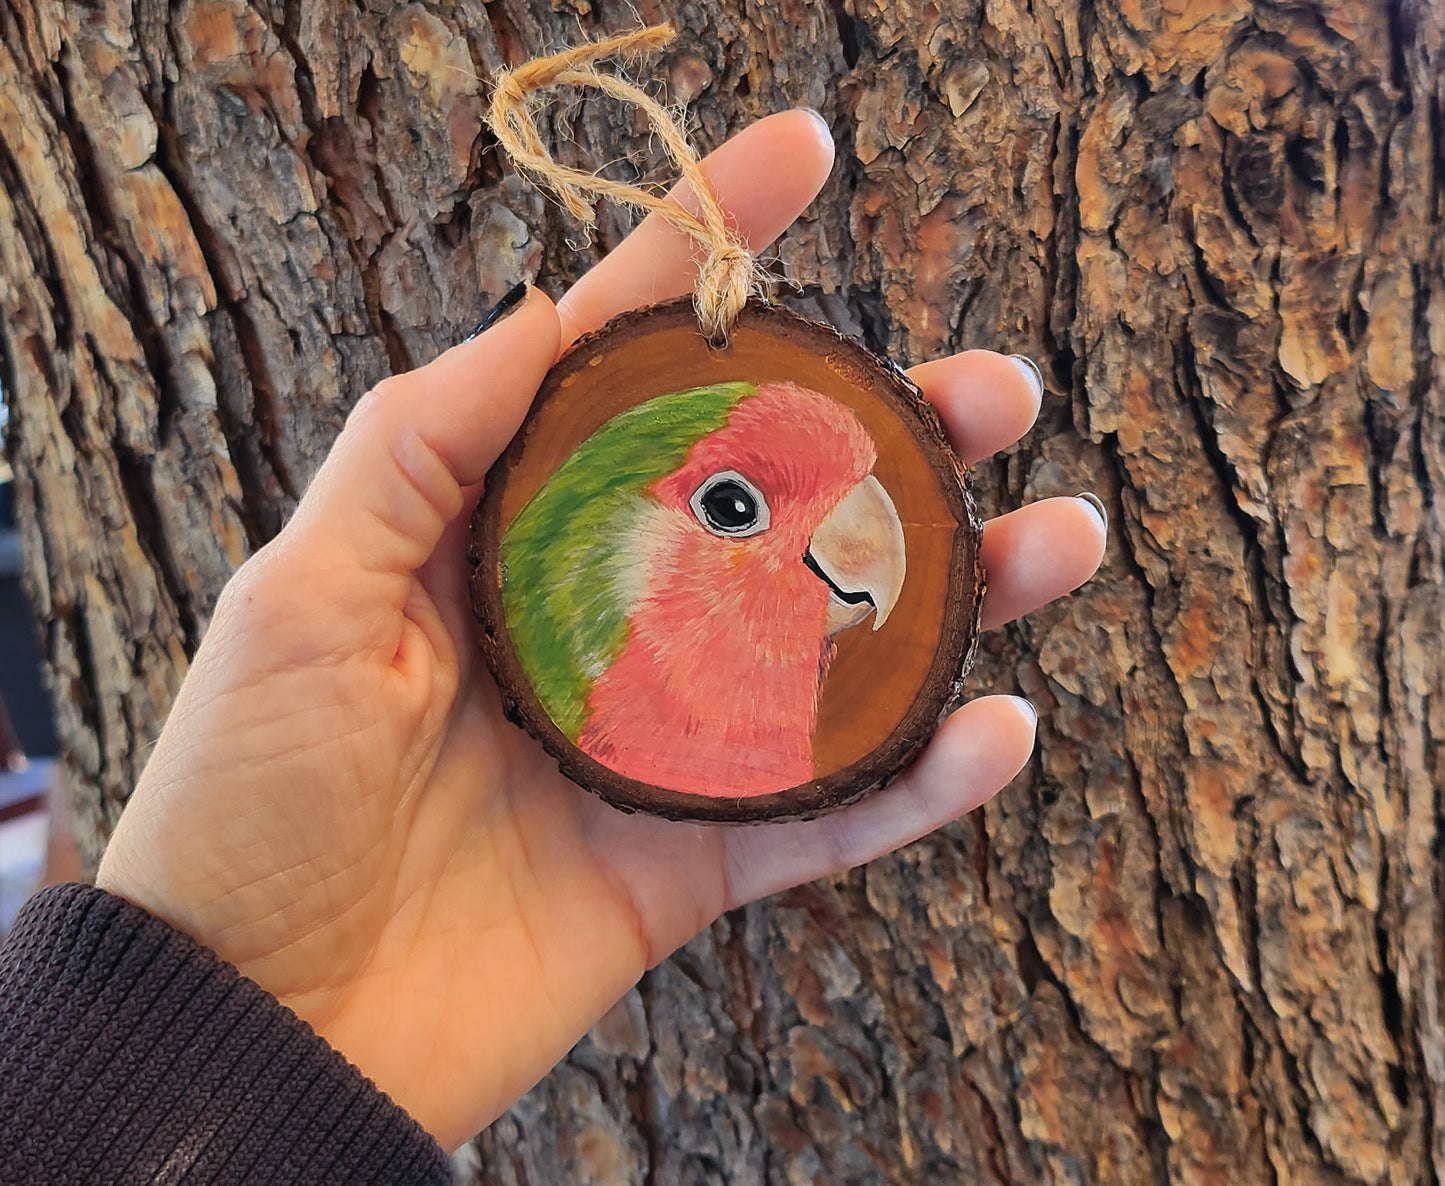 Rosy Faced Lovebird - Pear Wood Slice, Hand Painted Parrot on Wood Parakeet